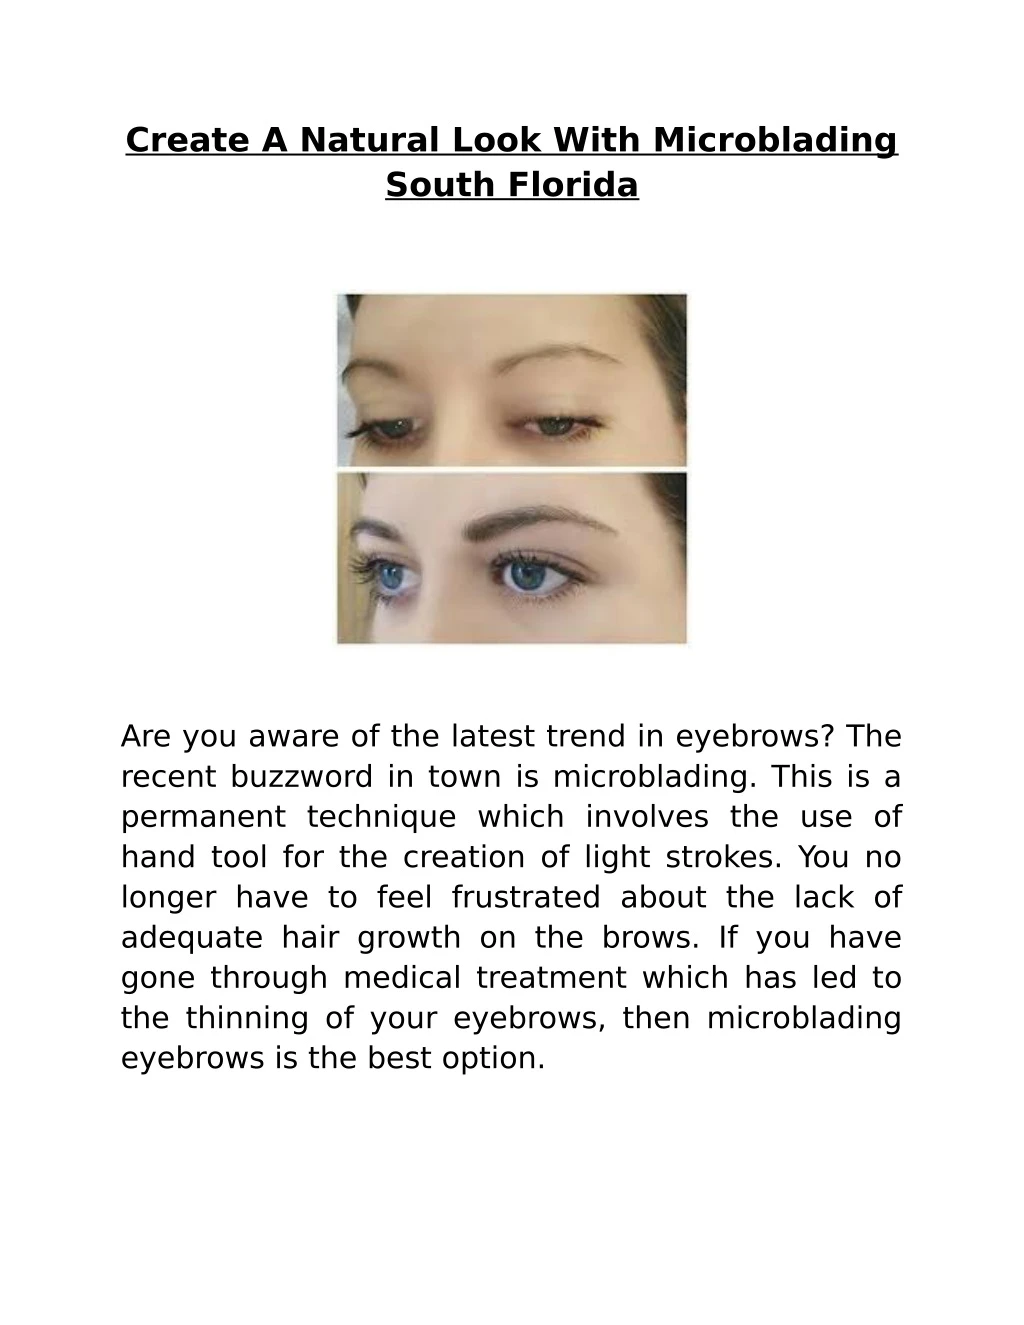 create a natural look with microblading south